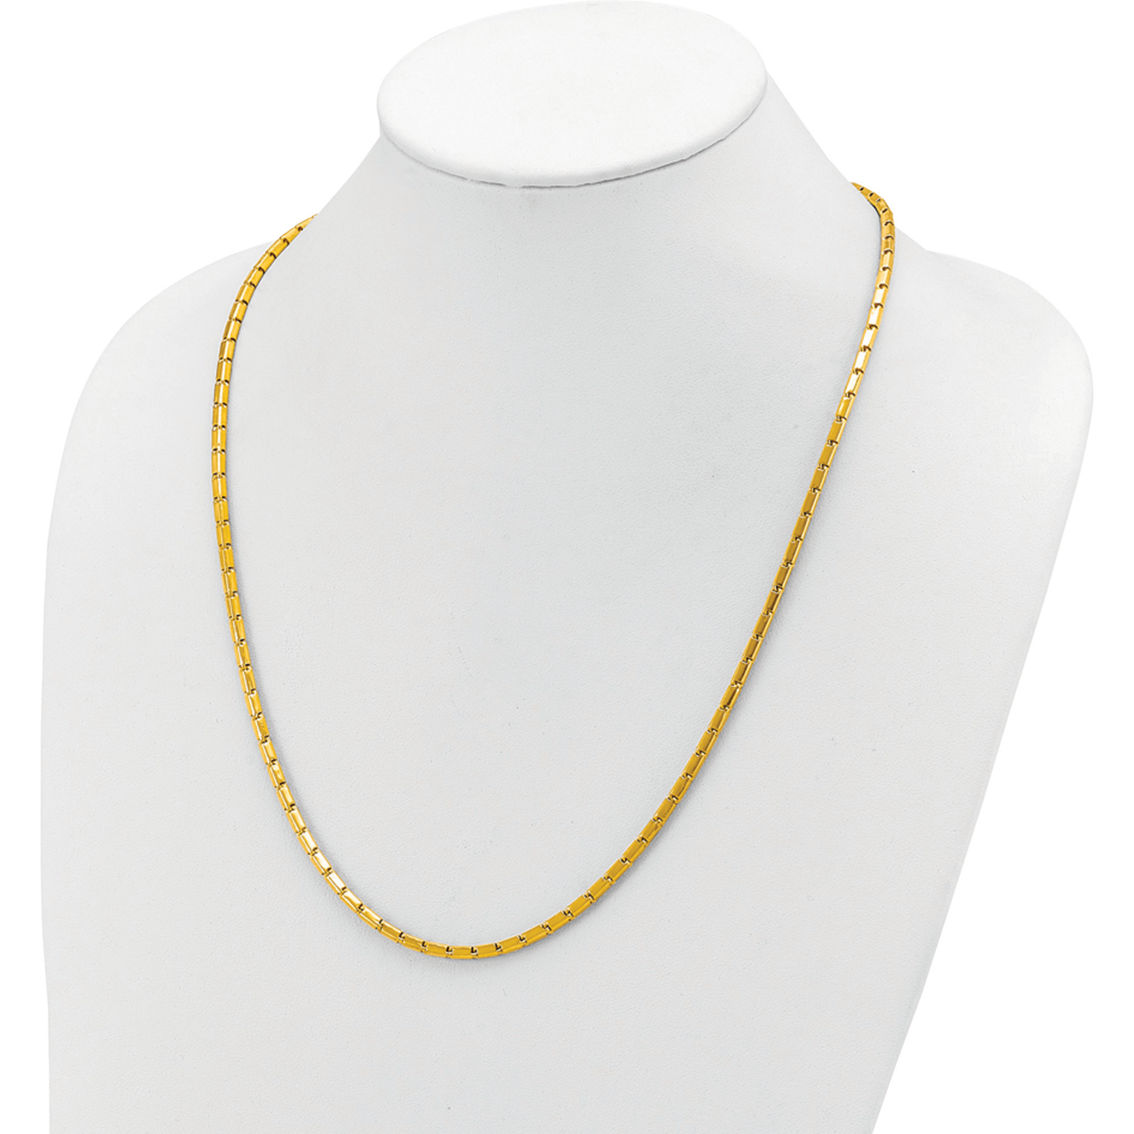 24K Pure Gold 24K Yellow Gold Solid Square 3mm Barrel Link 18 in. Chain - Image 4 of 5